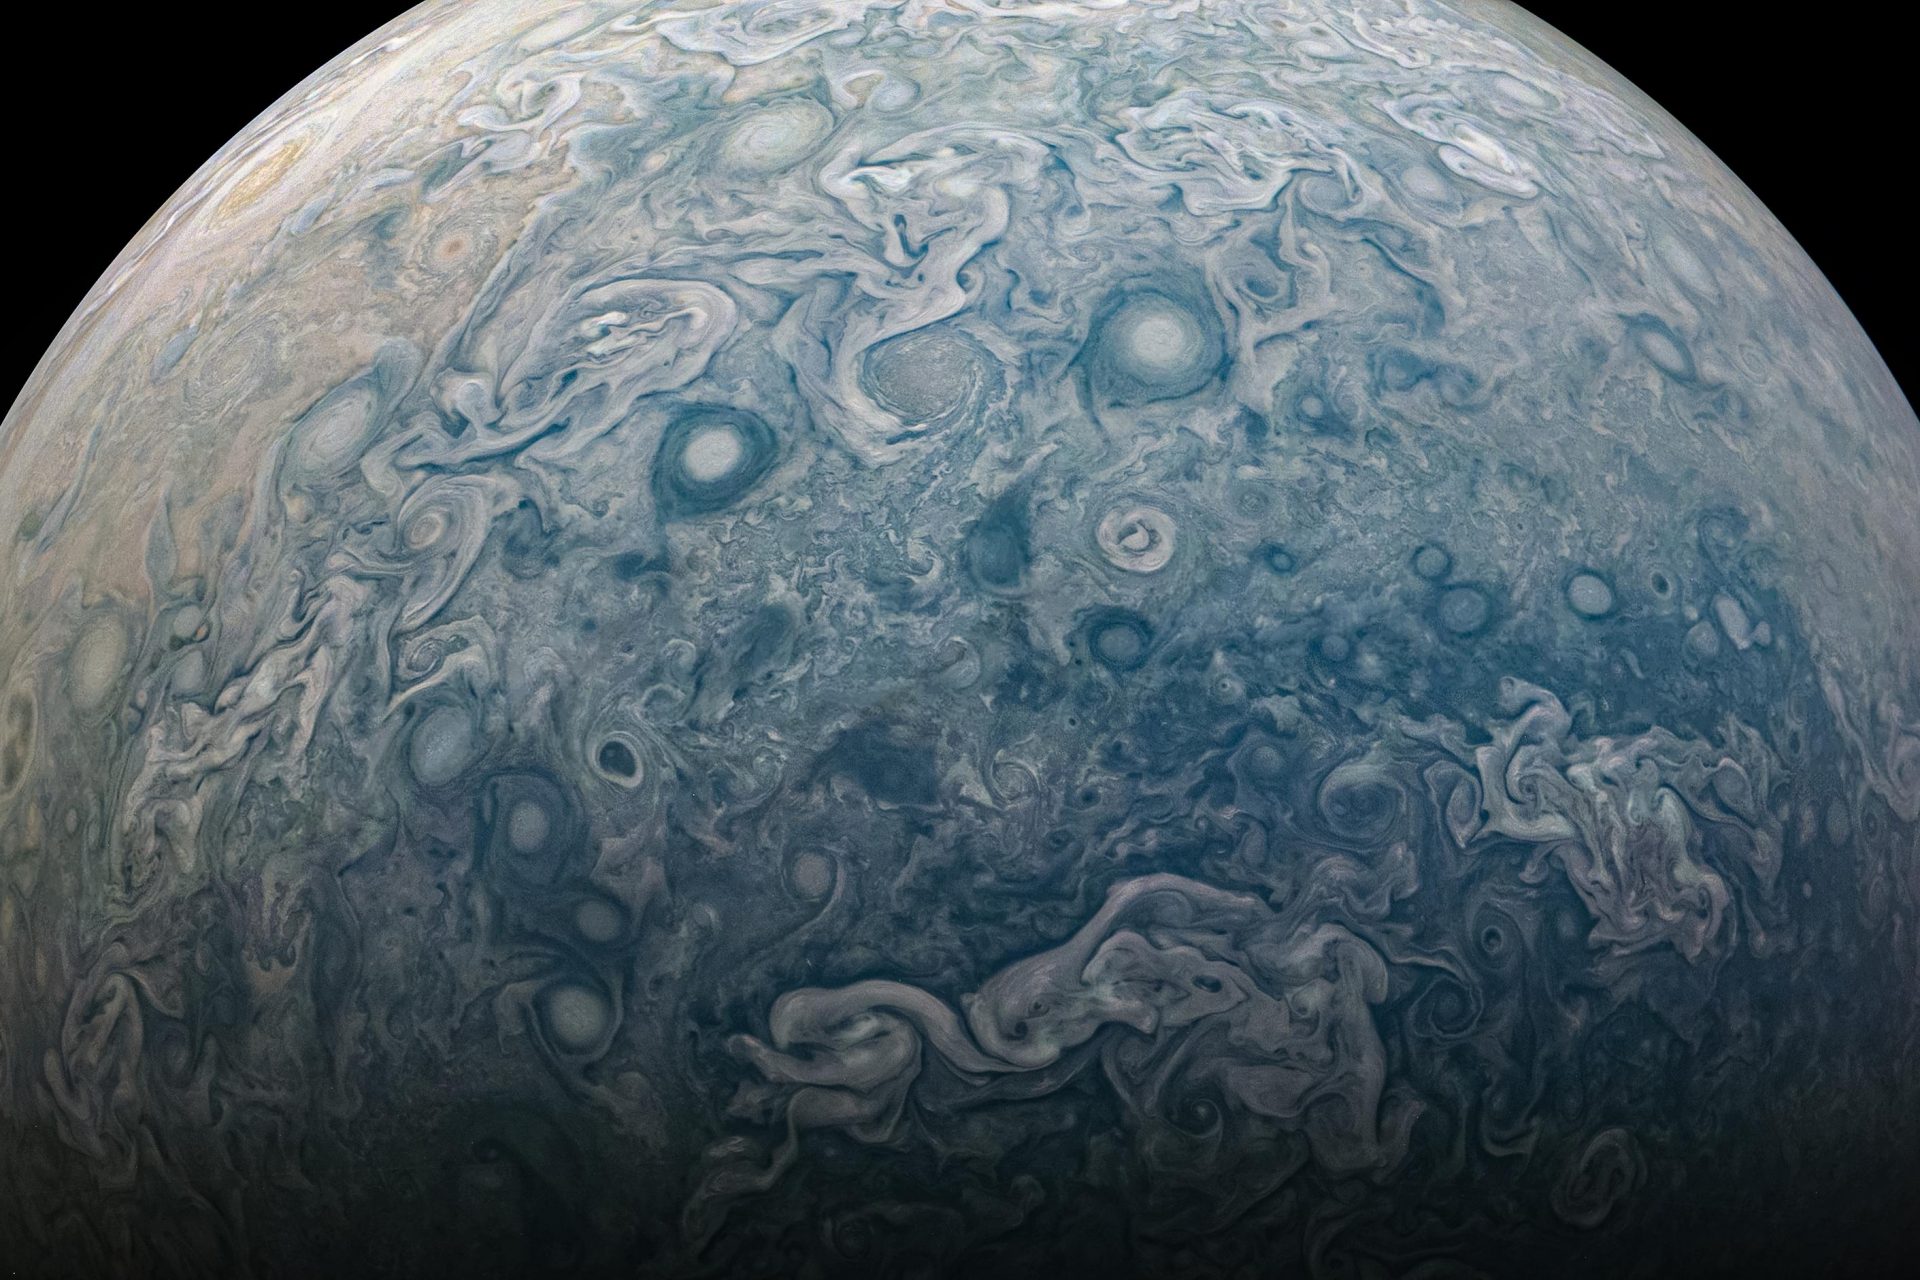 Looking at Jupiter’s violent storms in a brand new light 